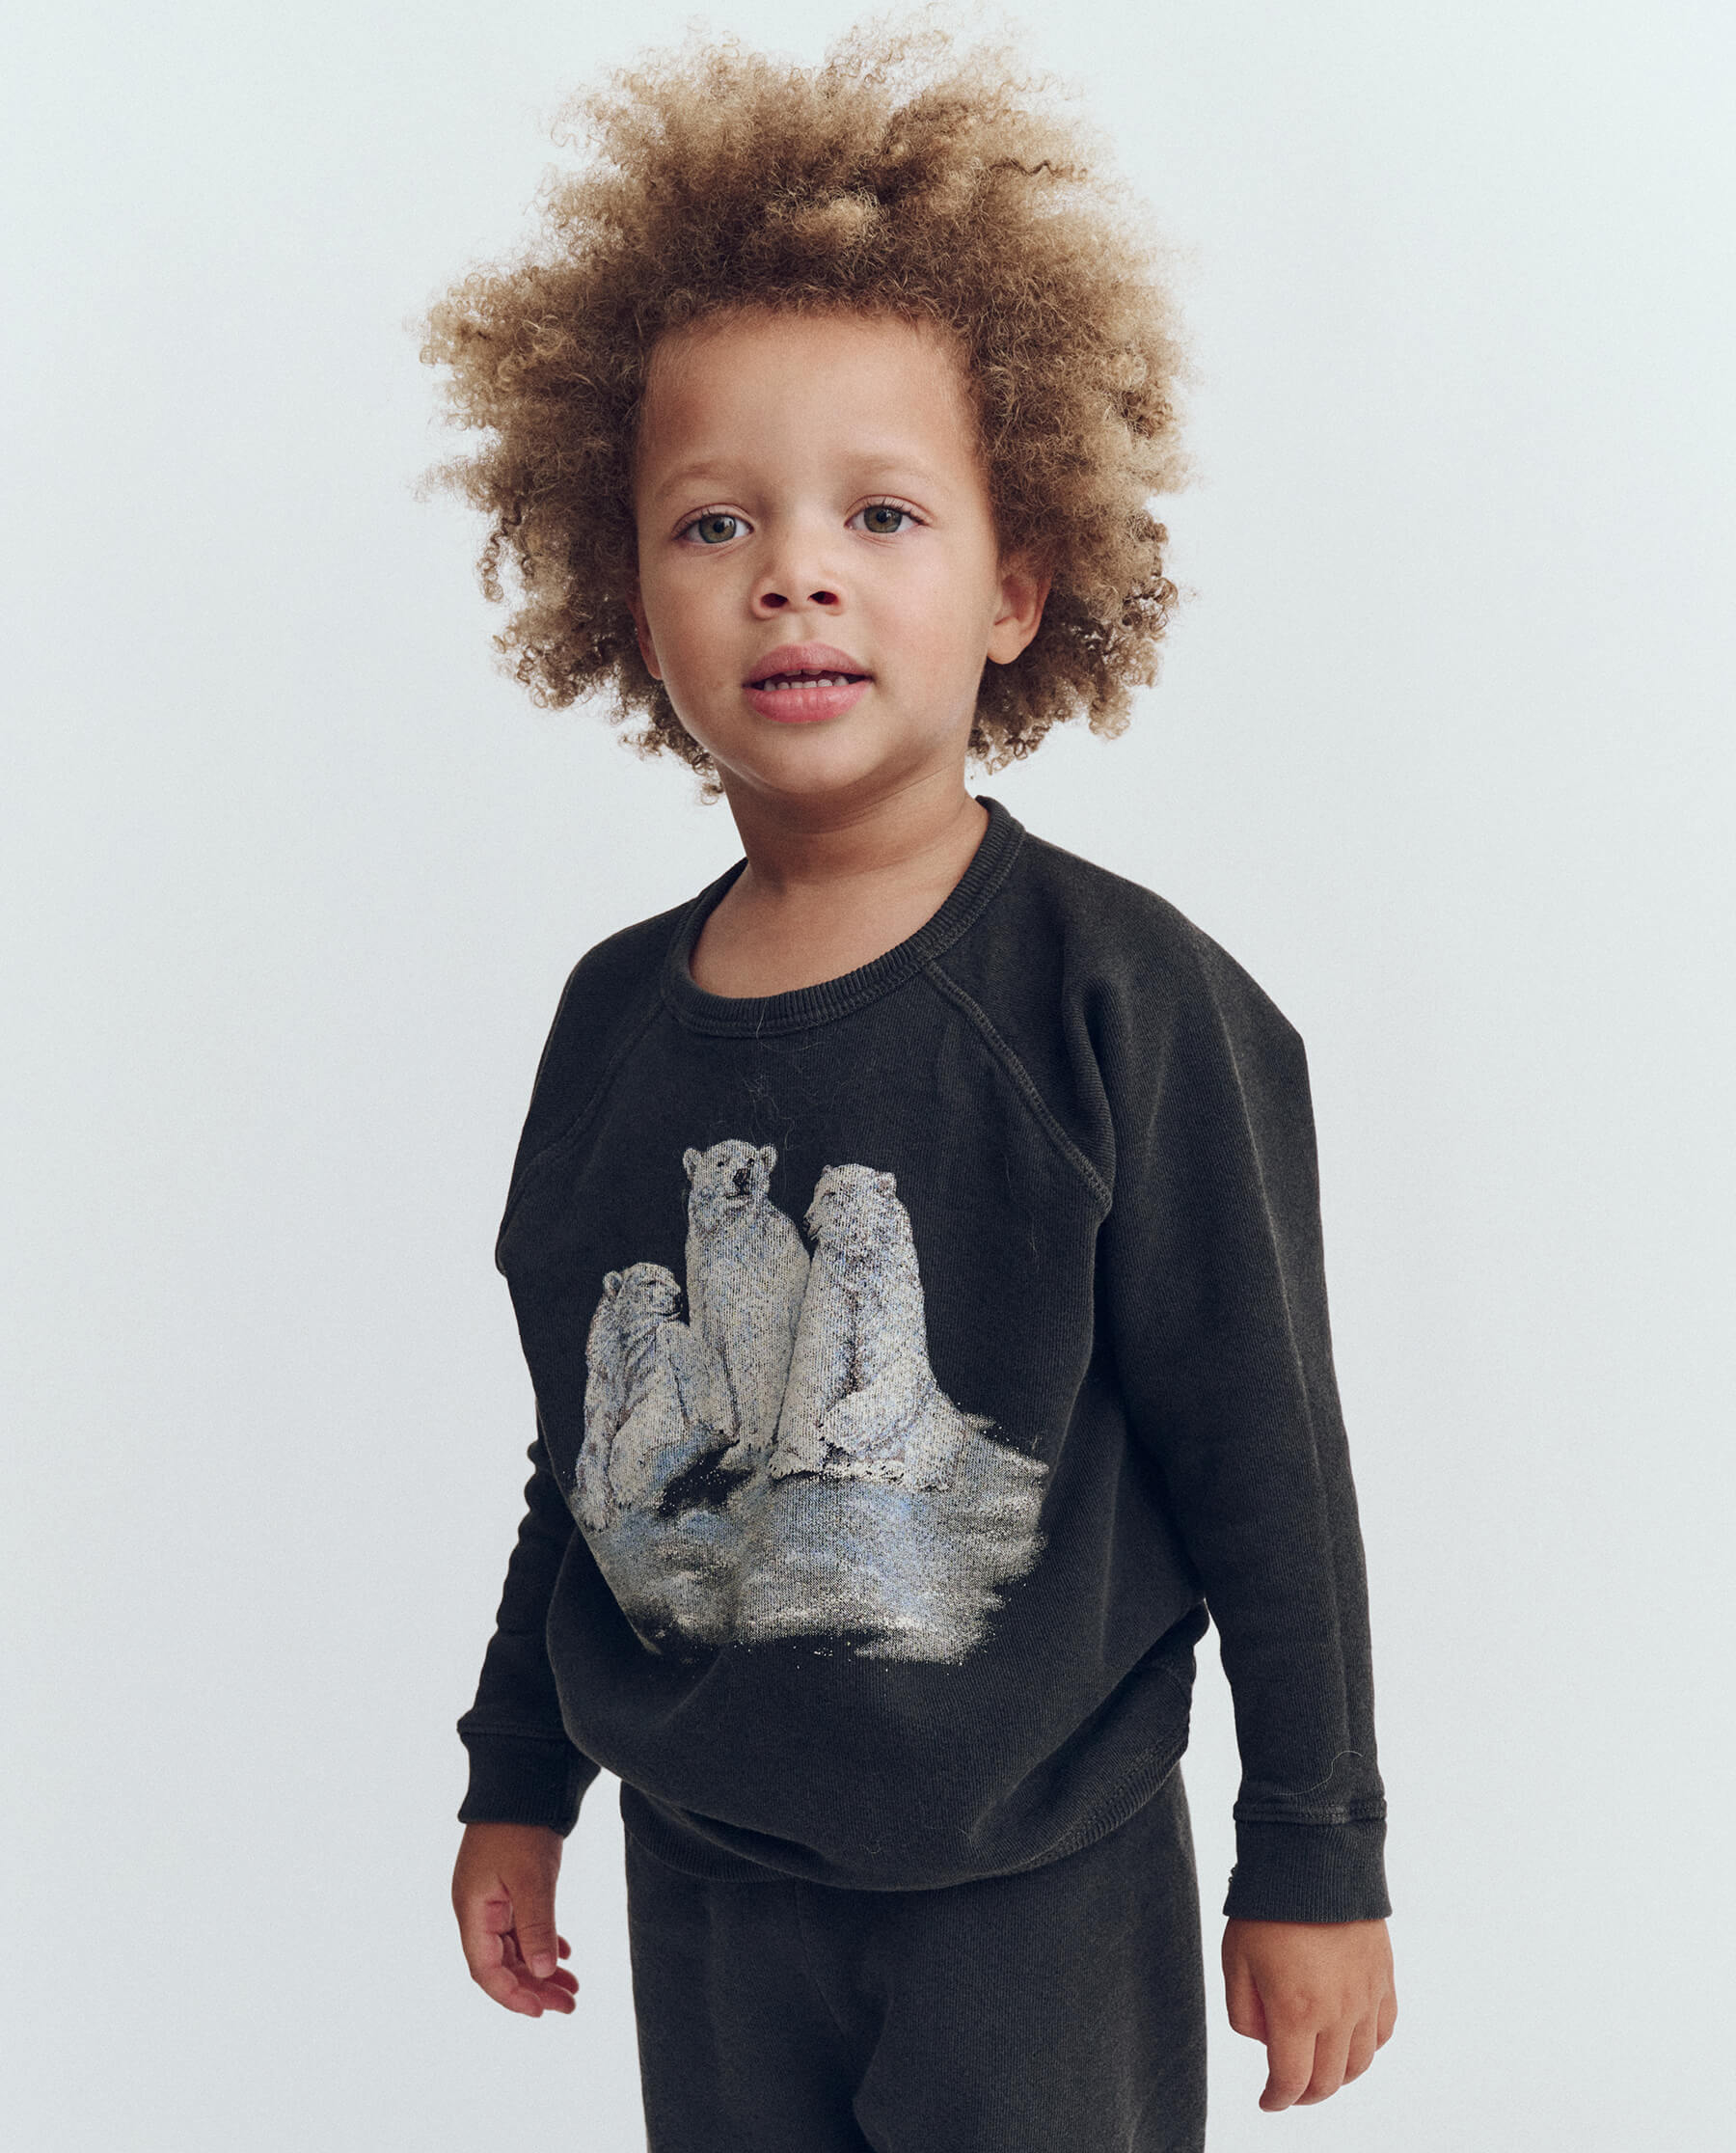 The Little College Sweatshirt. -- Washed Black with Polar Bear Graphic SWEATSHIRTS THE GREAT. HOL 23 D1 LITTLE